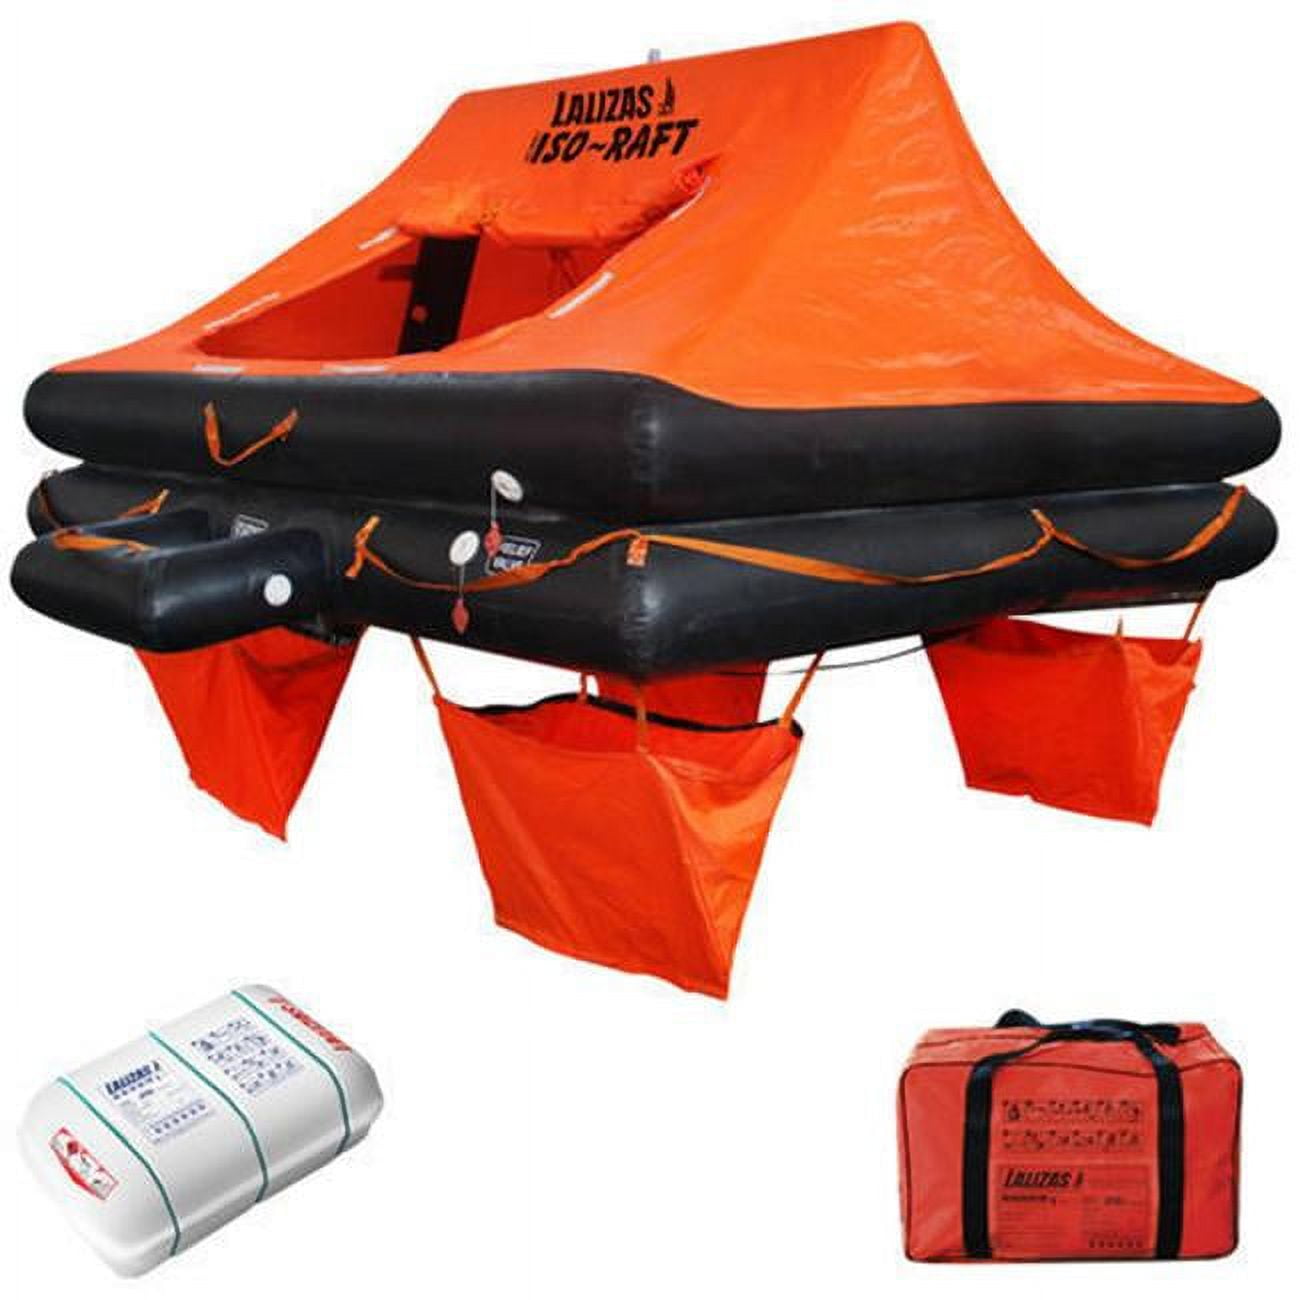 DUY6CCR 6 Person Liberty Recreational Offshore Raft with Liferaft in Container -  Datrex